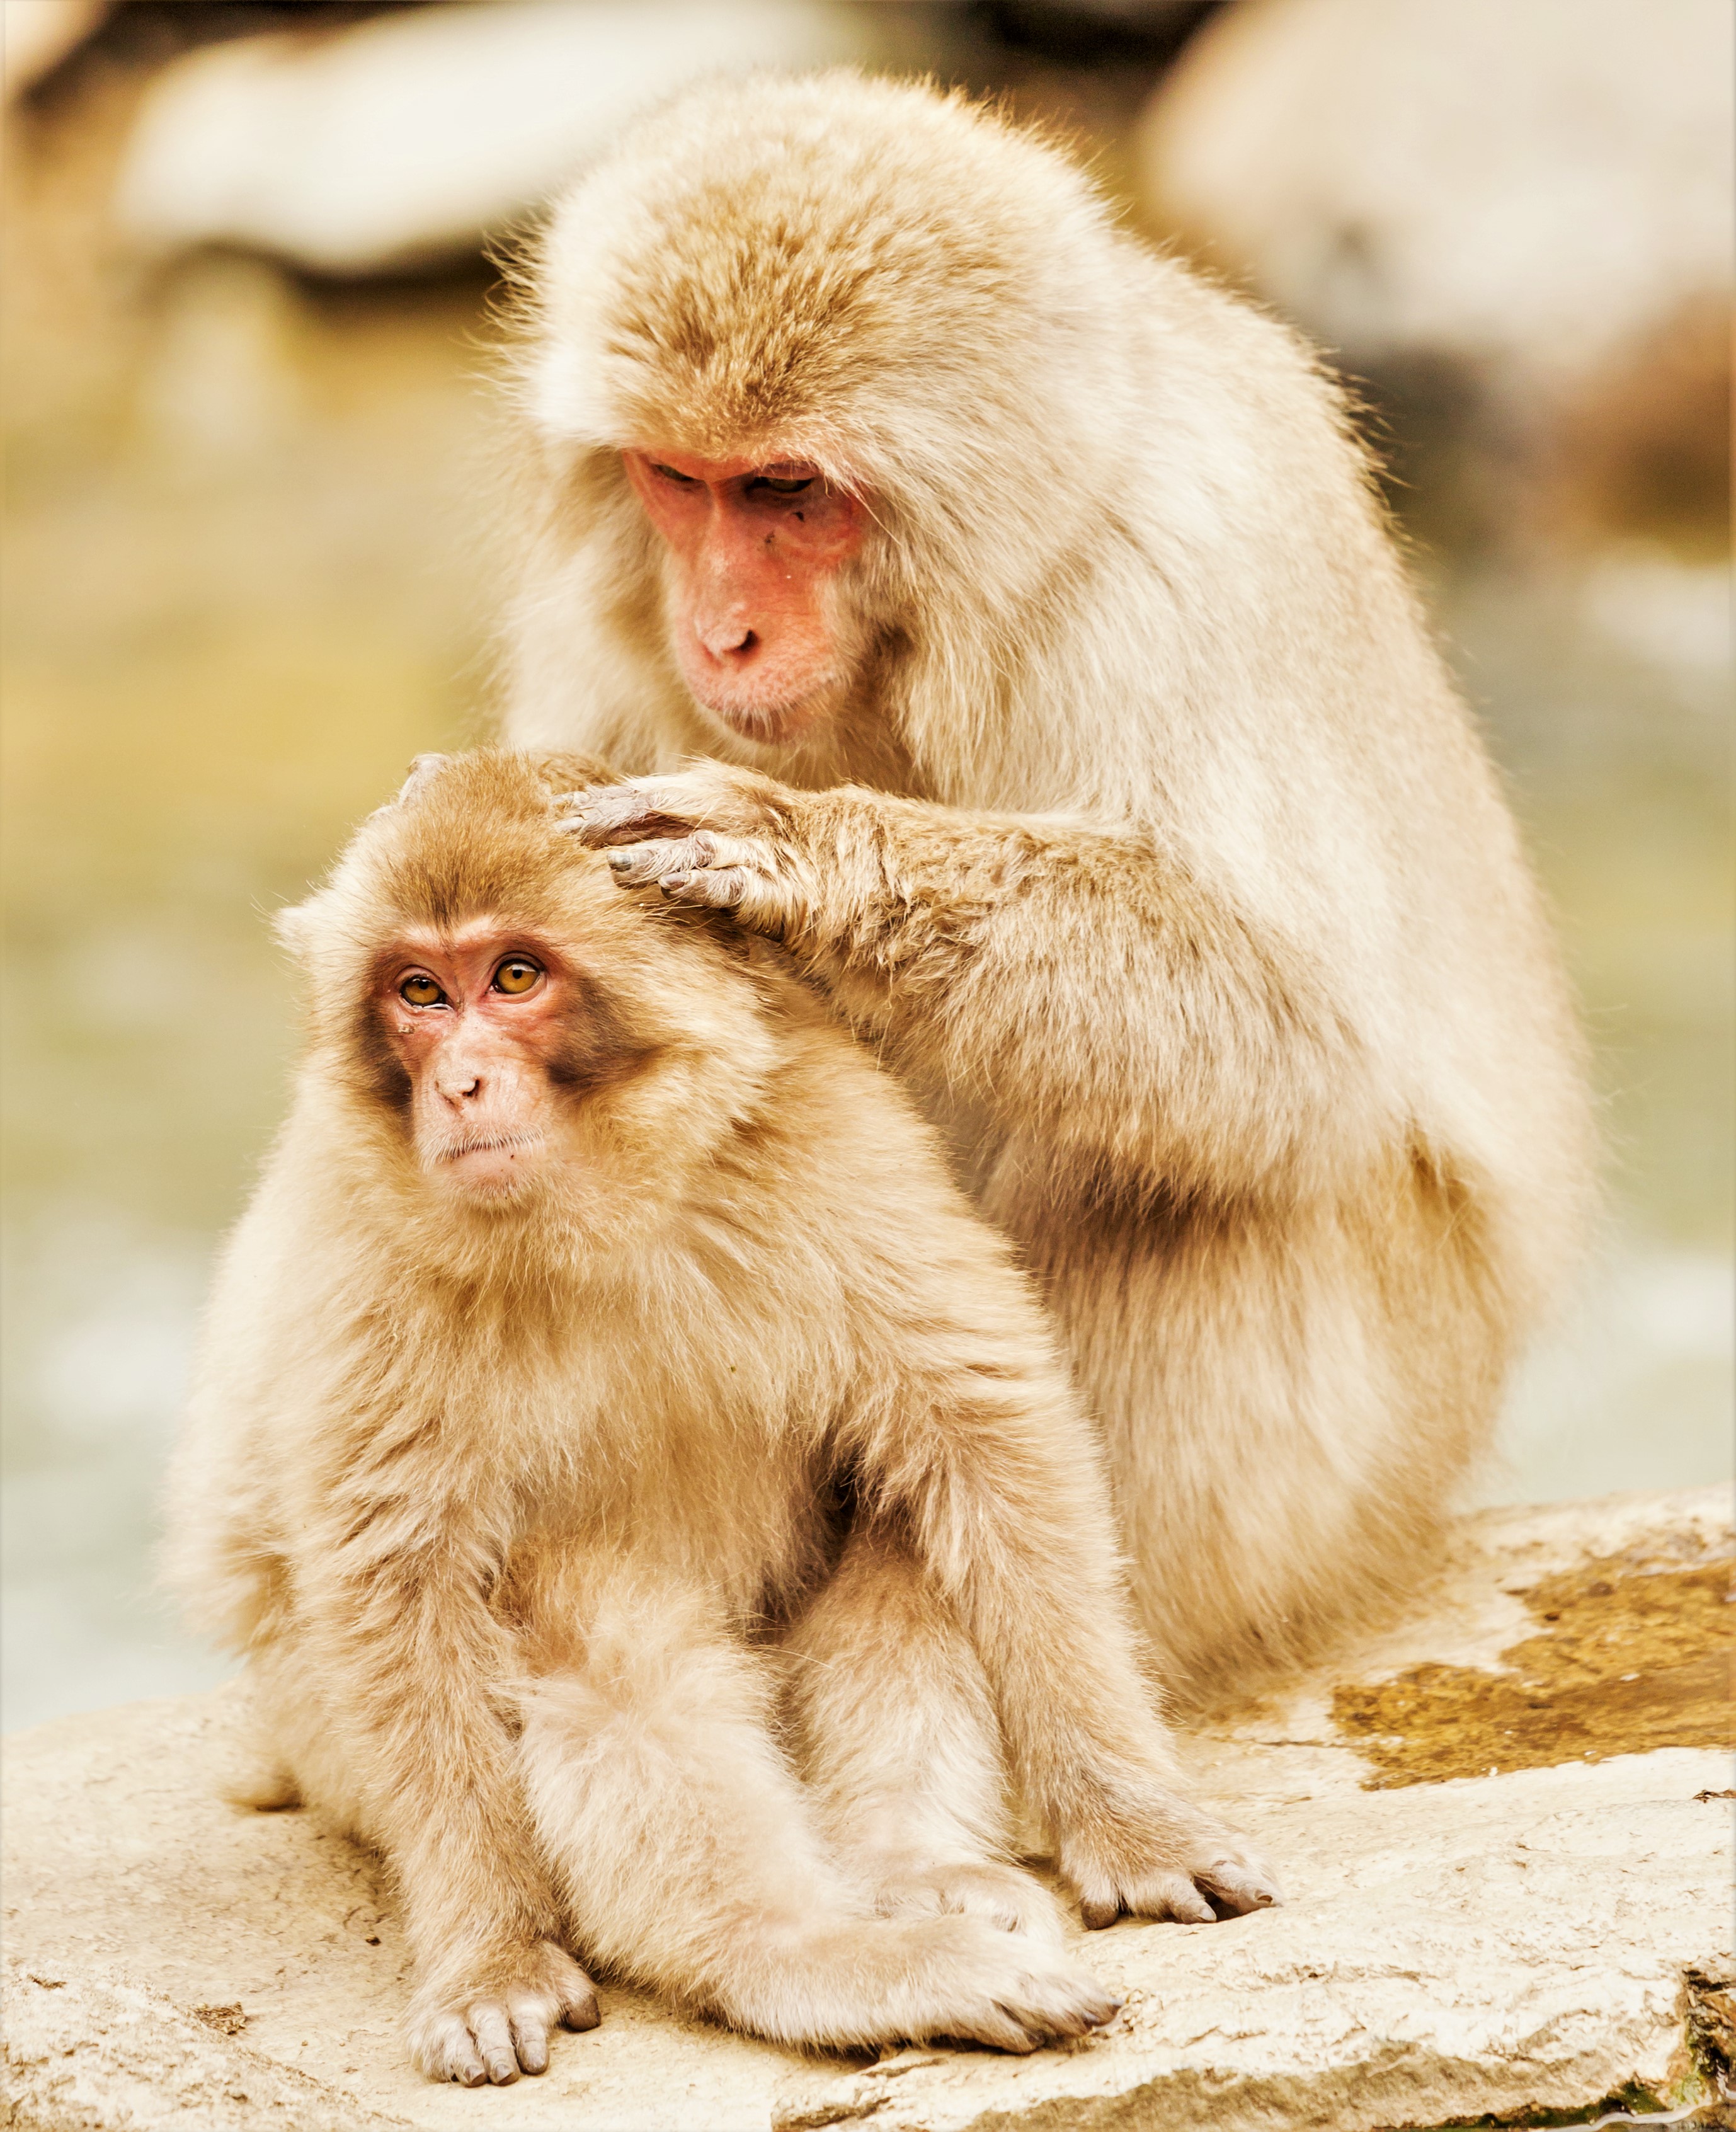 Japanese_Snow_Monkey_(Macaque)_Mother_Grooms_Her_Young.jpg